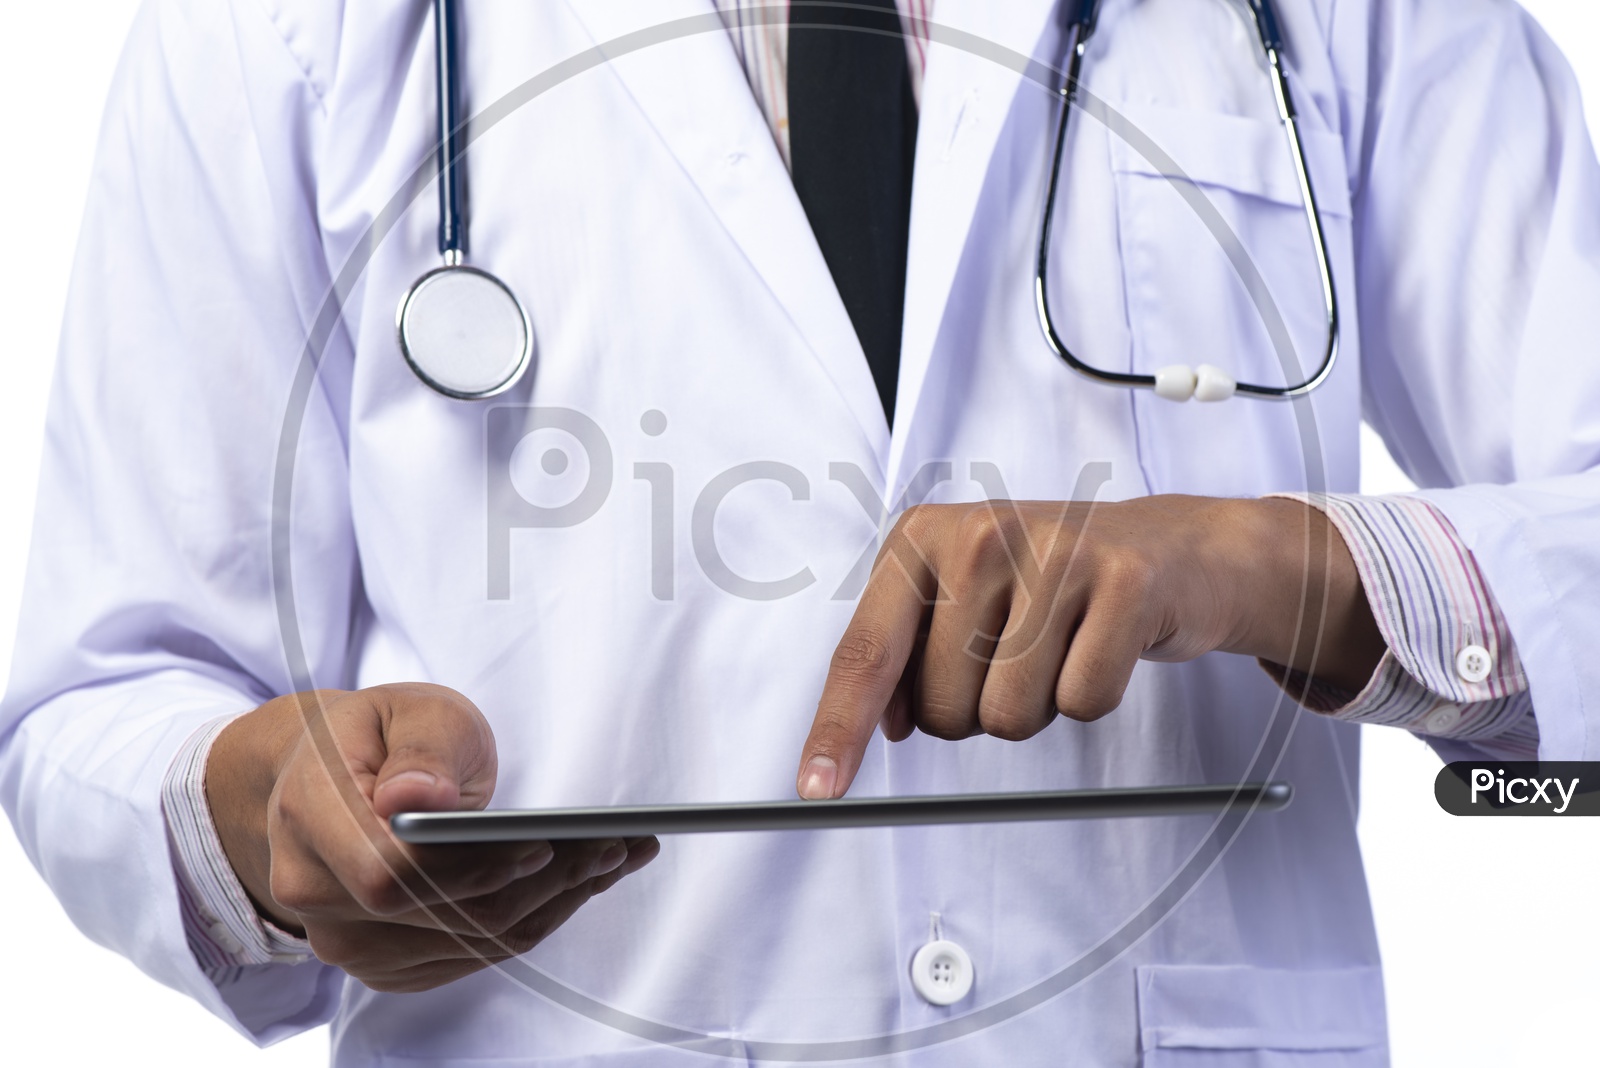 Doctor with White Apron and stethoscope using Tablet or iPad